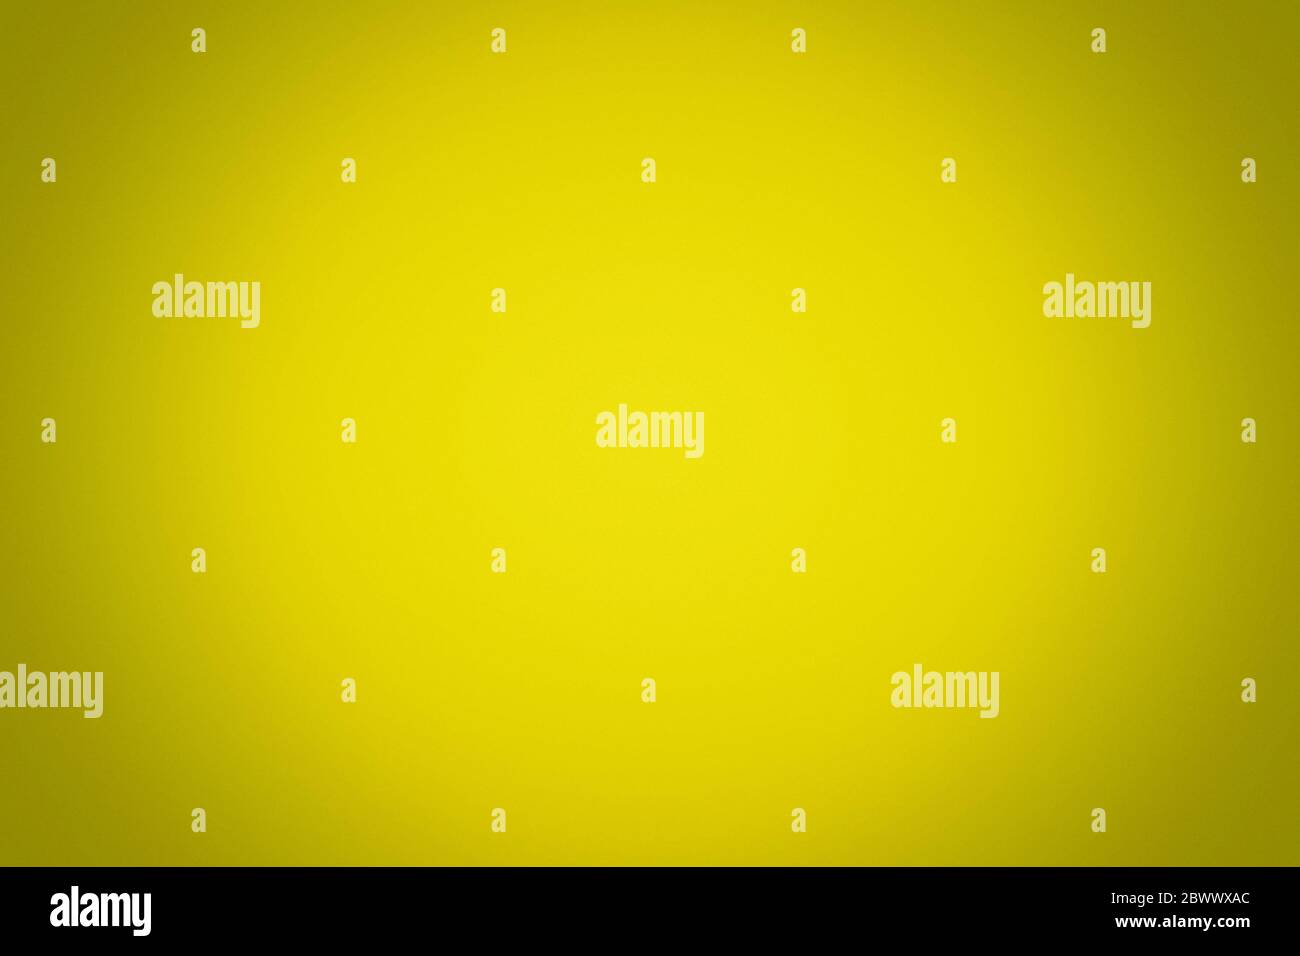 Abstract Bright Yellow Gradient Texture Background with Grain. Stock Photo